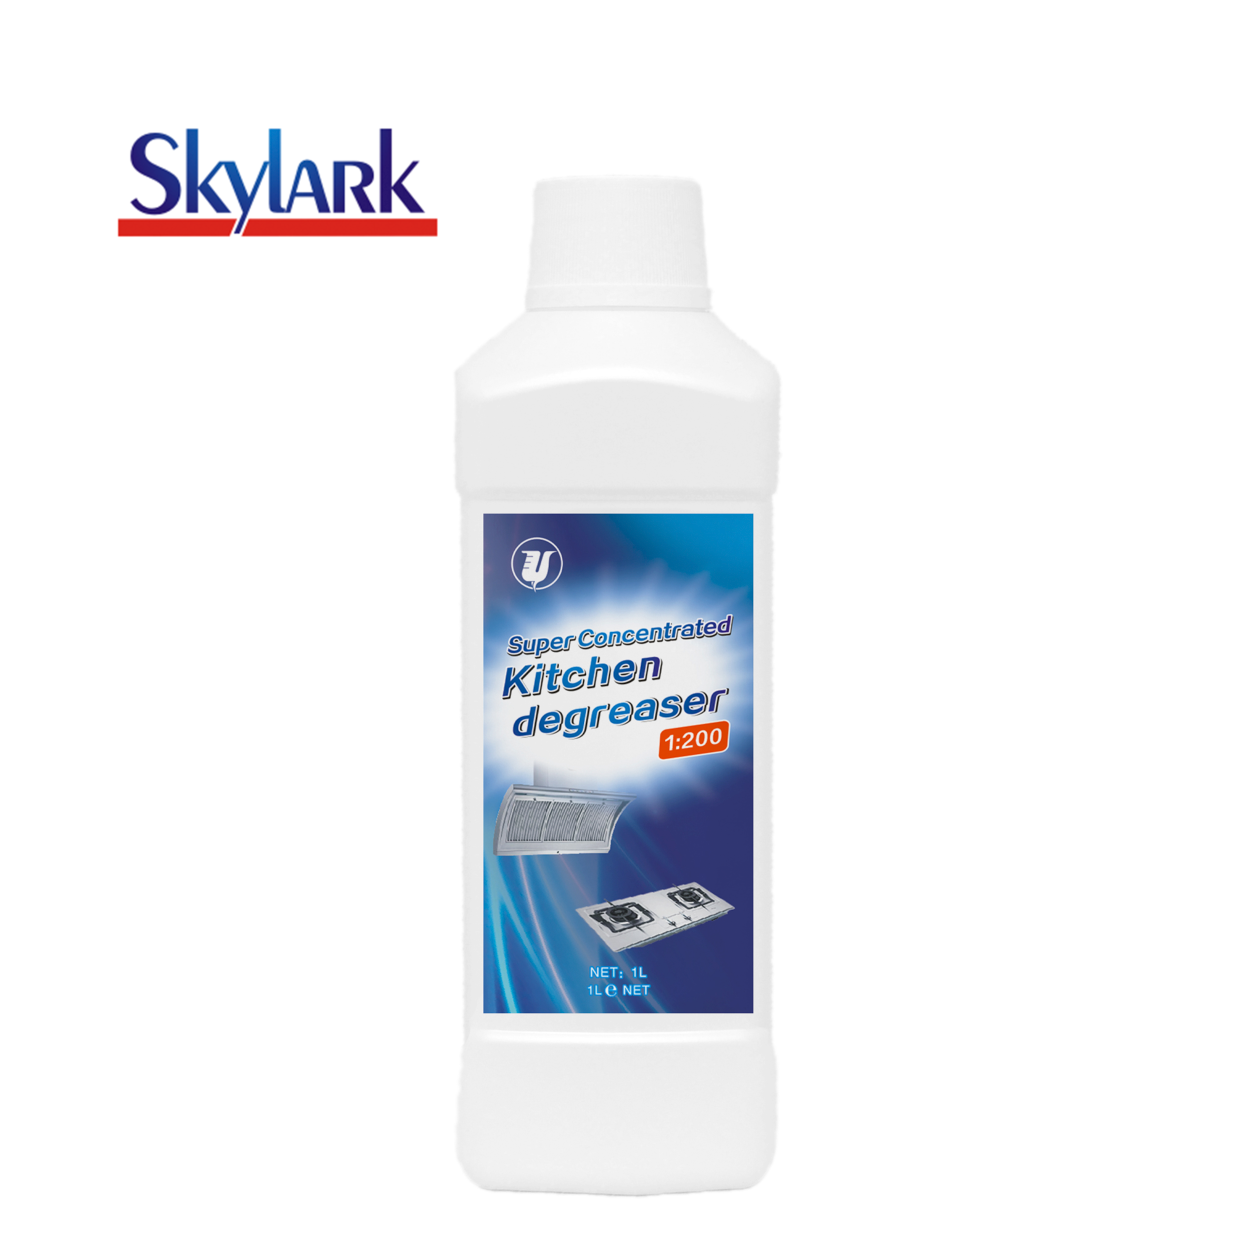 Super Concentrated Kitchen Degreaser 1:200 With Excellent Performance